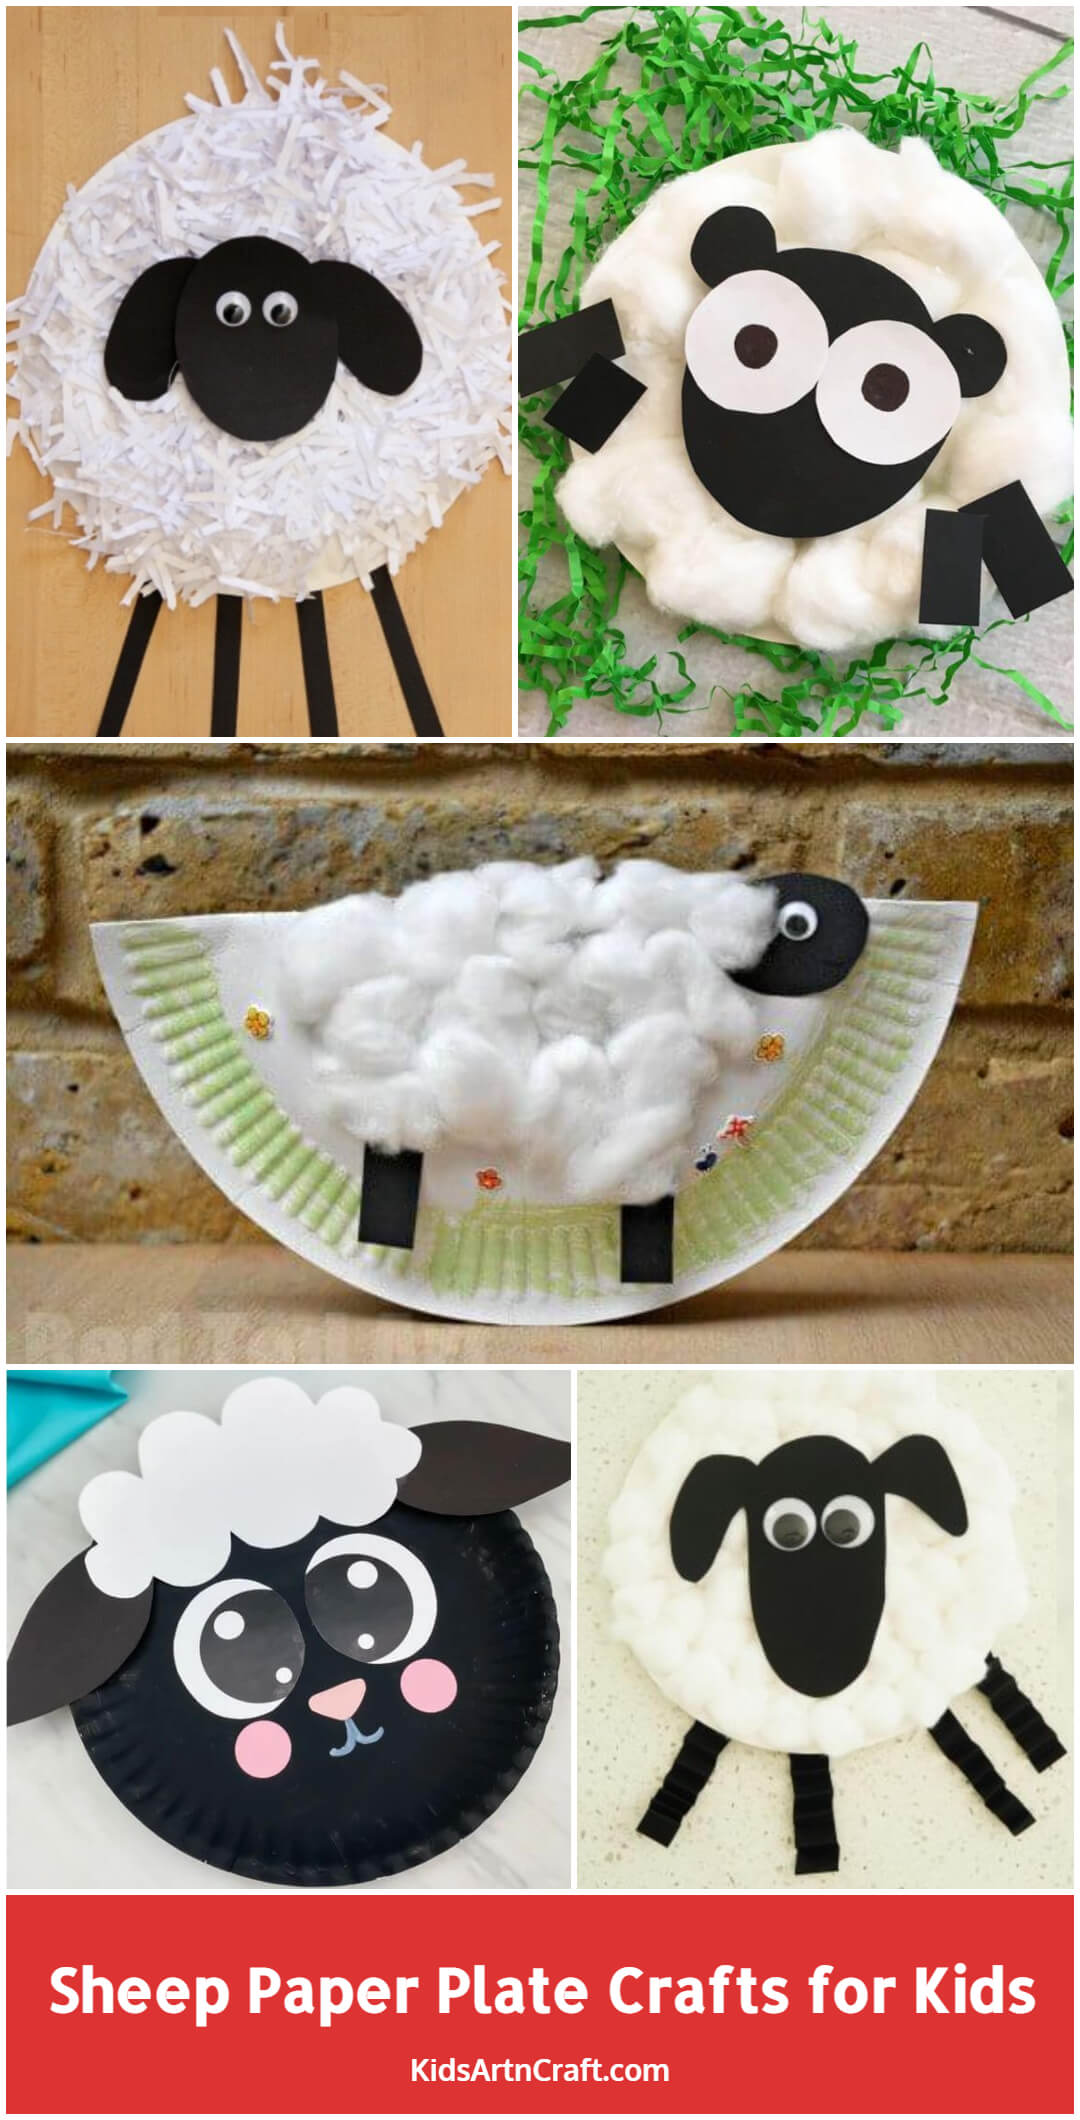 Sheep Paper Plate Crafts for Kids